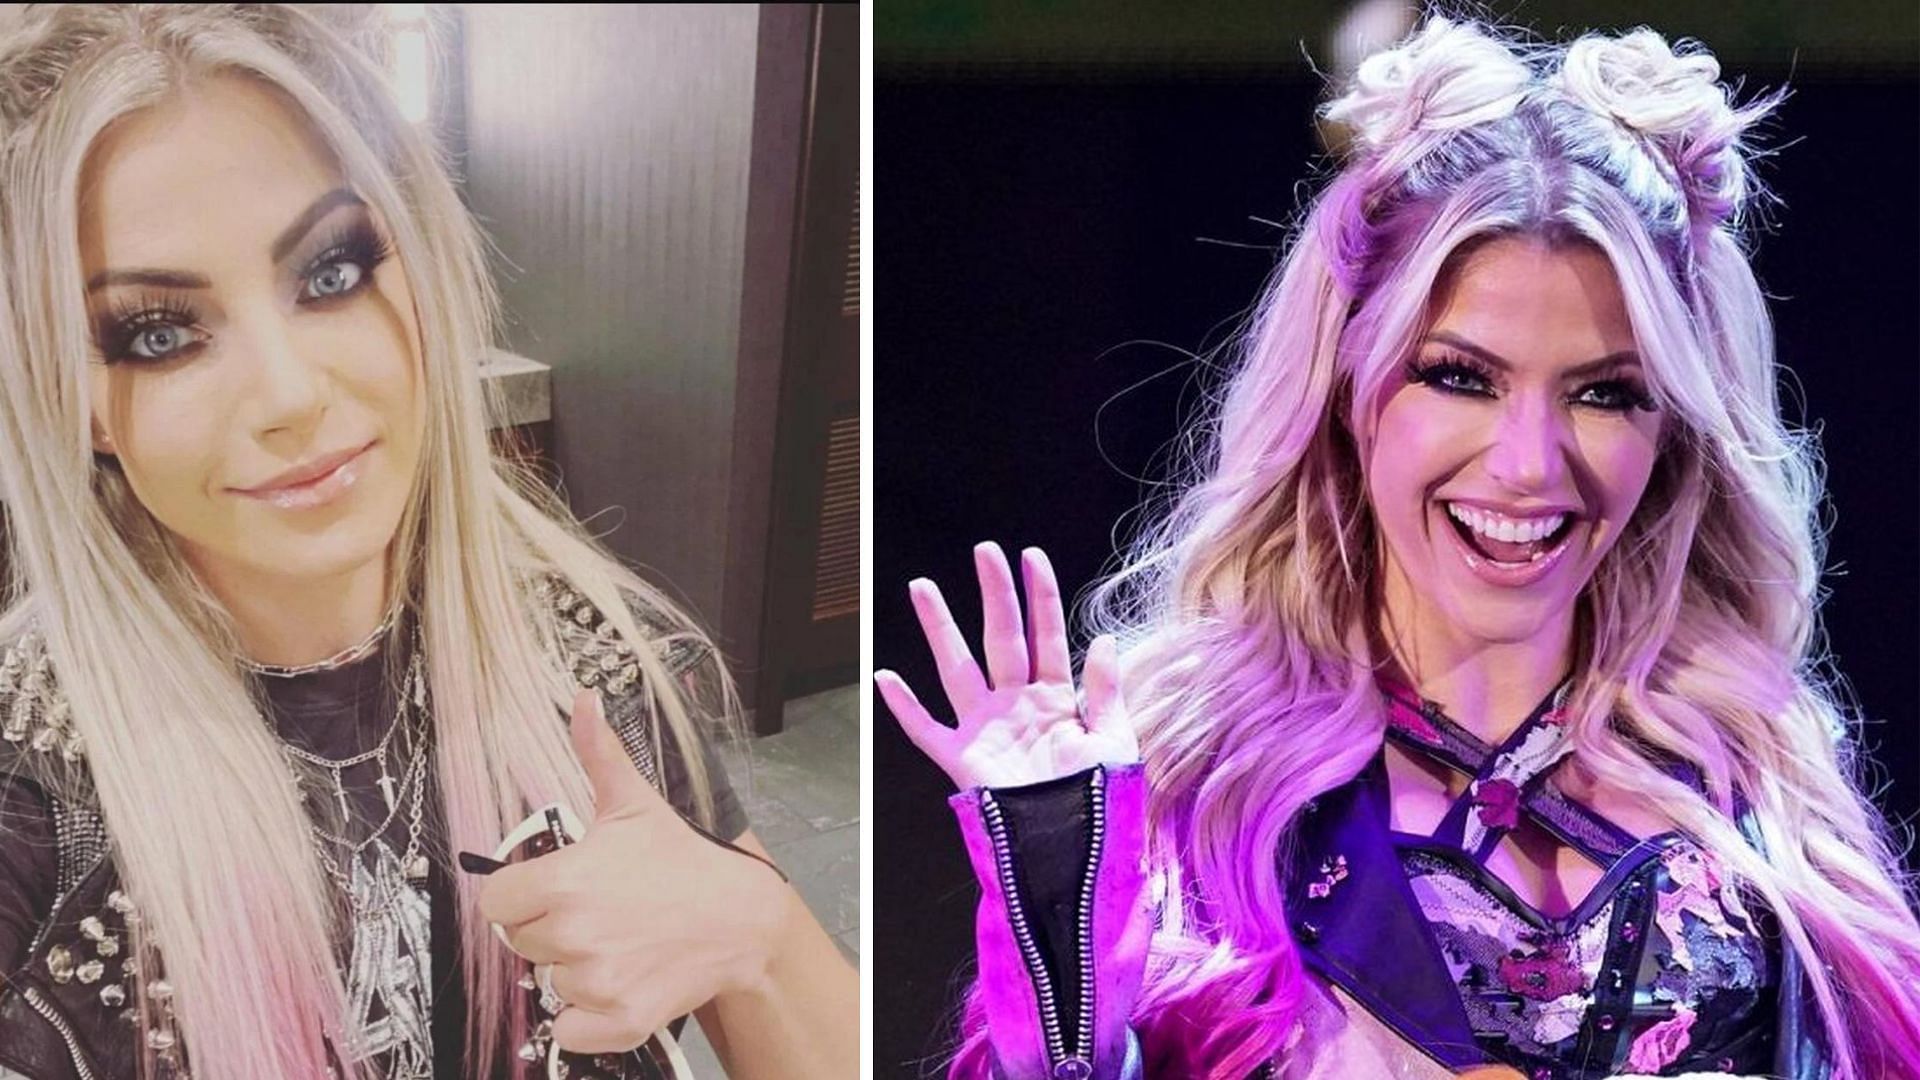 Alexa Bliss is excited to have her old friend back in WWE.